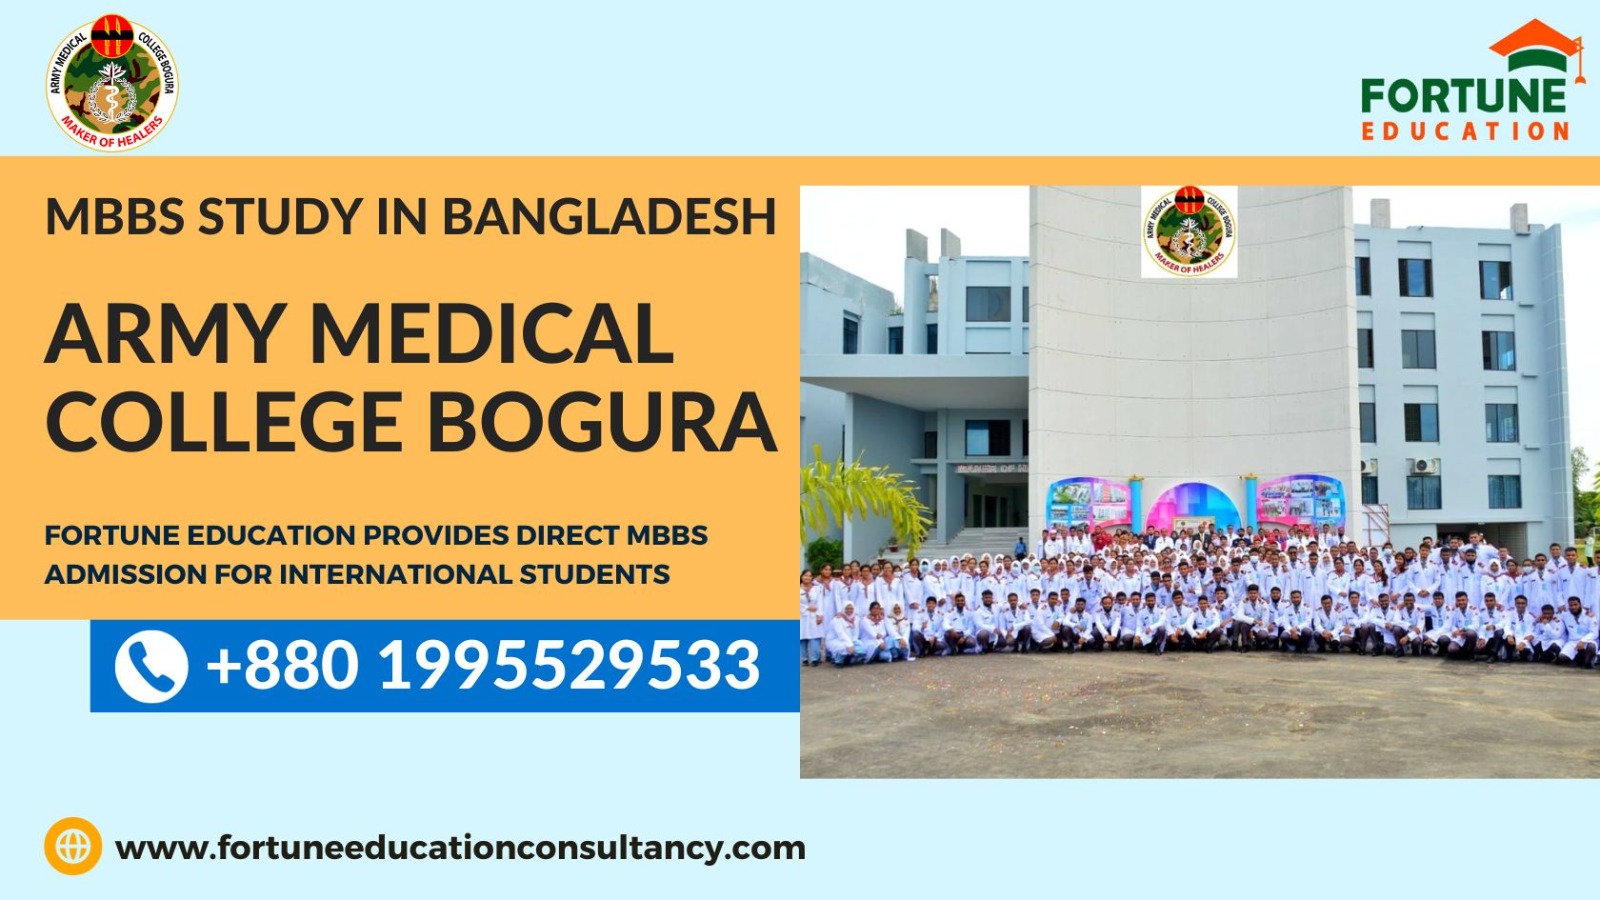 Application for MBBS admission in abroad